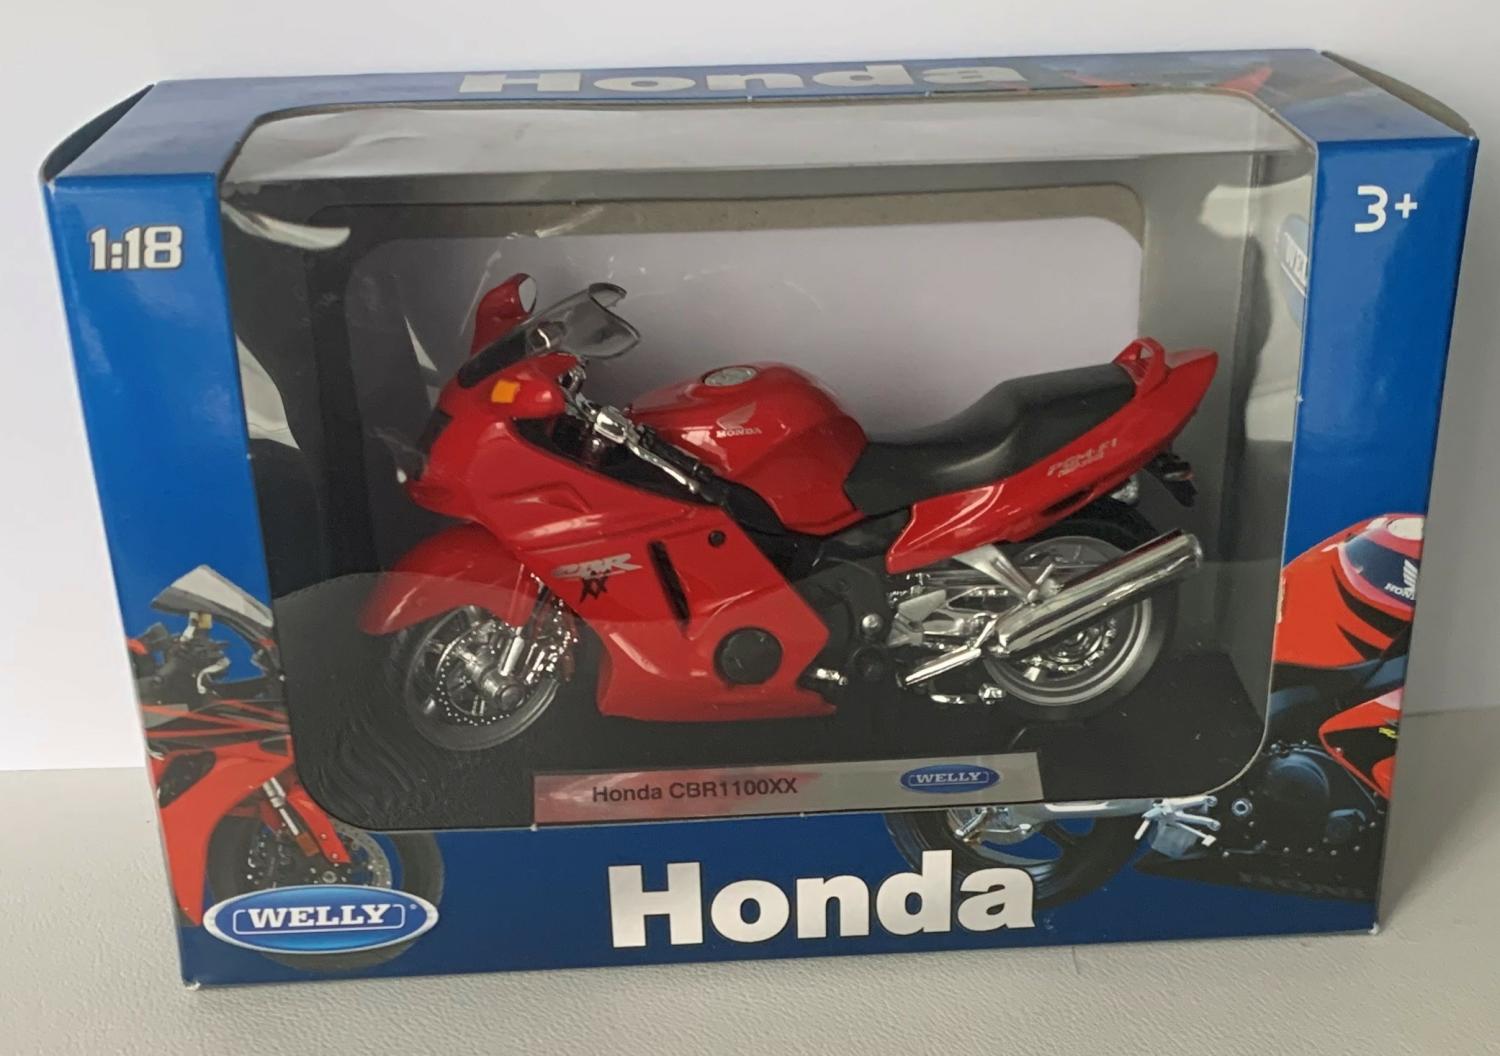 Honda CBR1100XX in red 1:18 scale from Welly